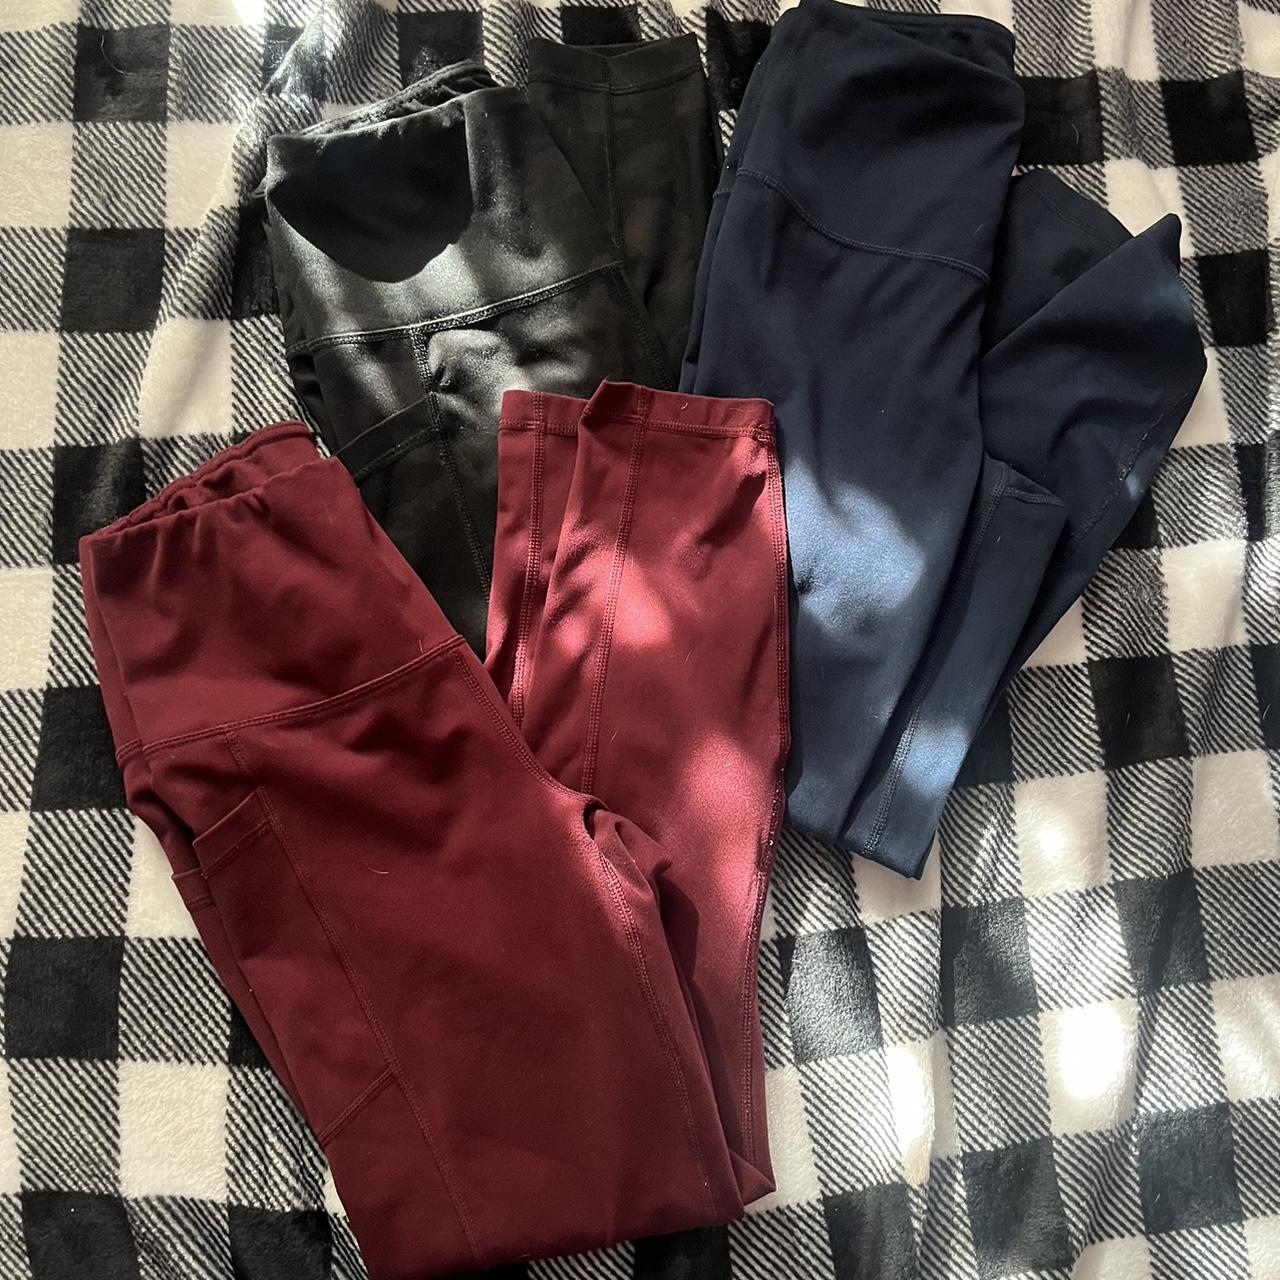 YogaLicious lux workout leggings set of 3 ❄️all size - Depop